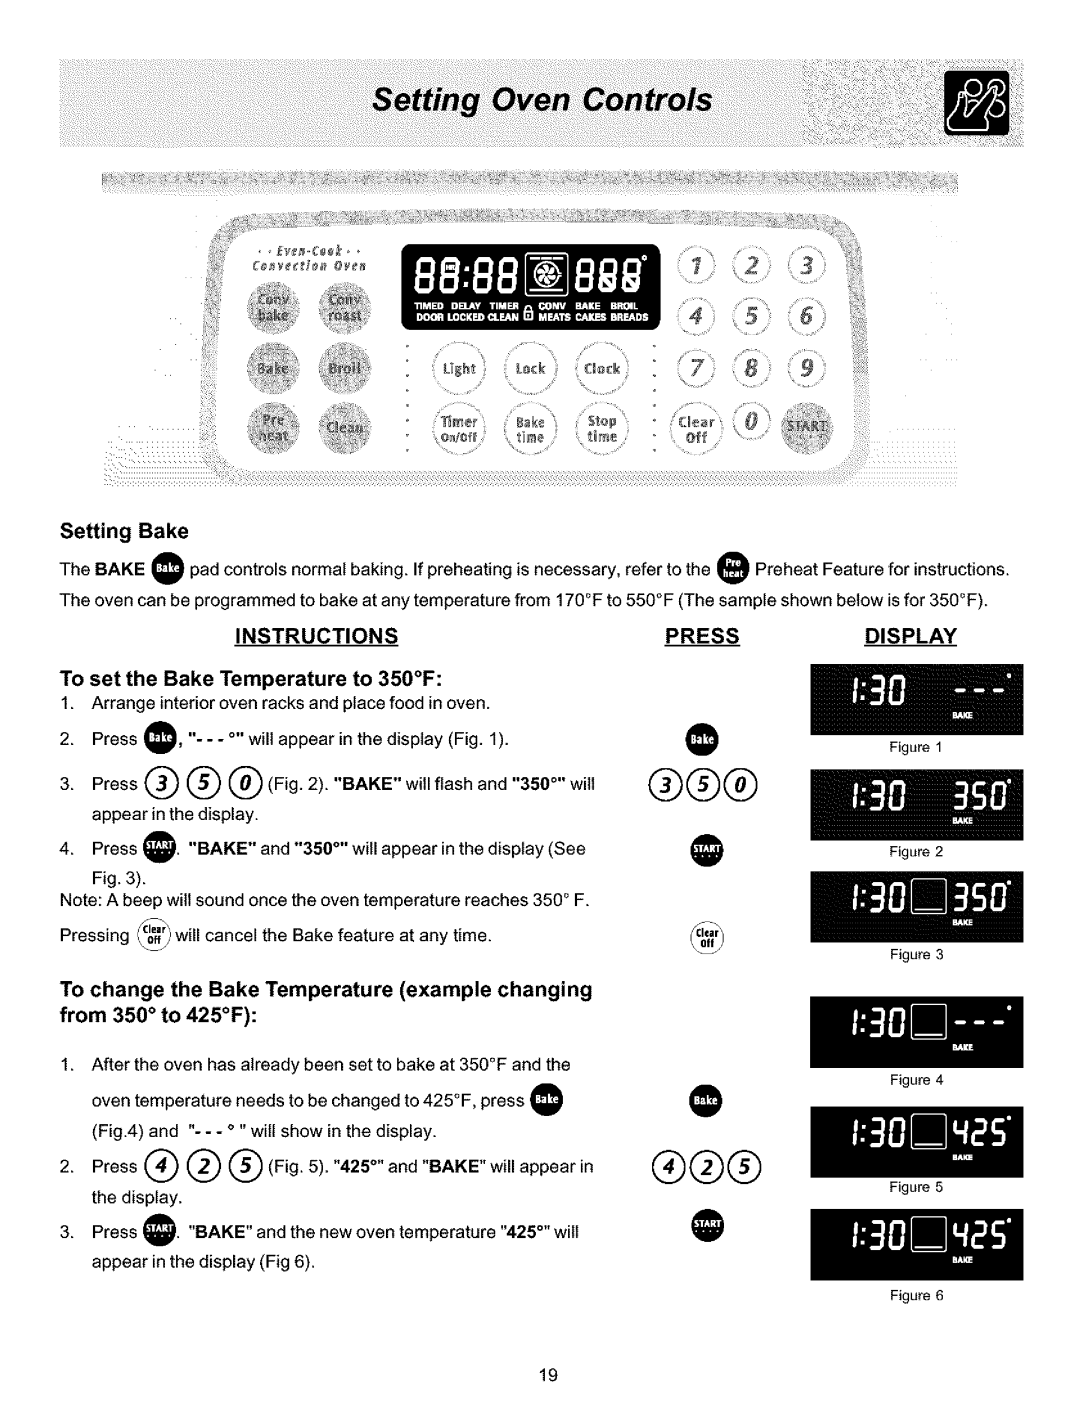 Frigidaire ES400 manual Setting Bake, To set the Bake Temperature to 350F 